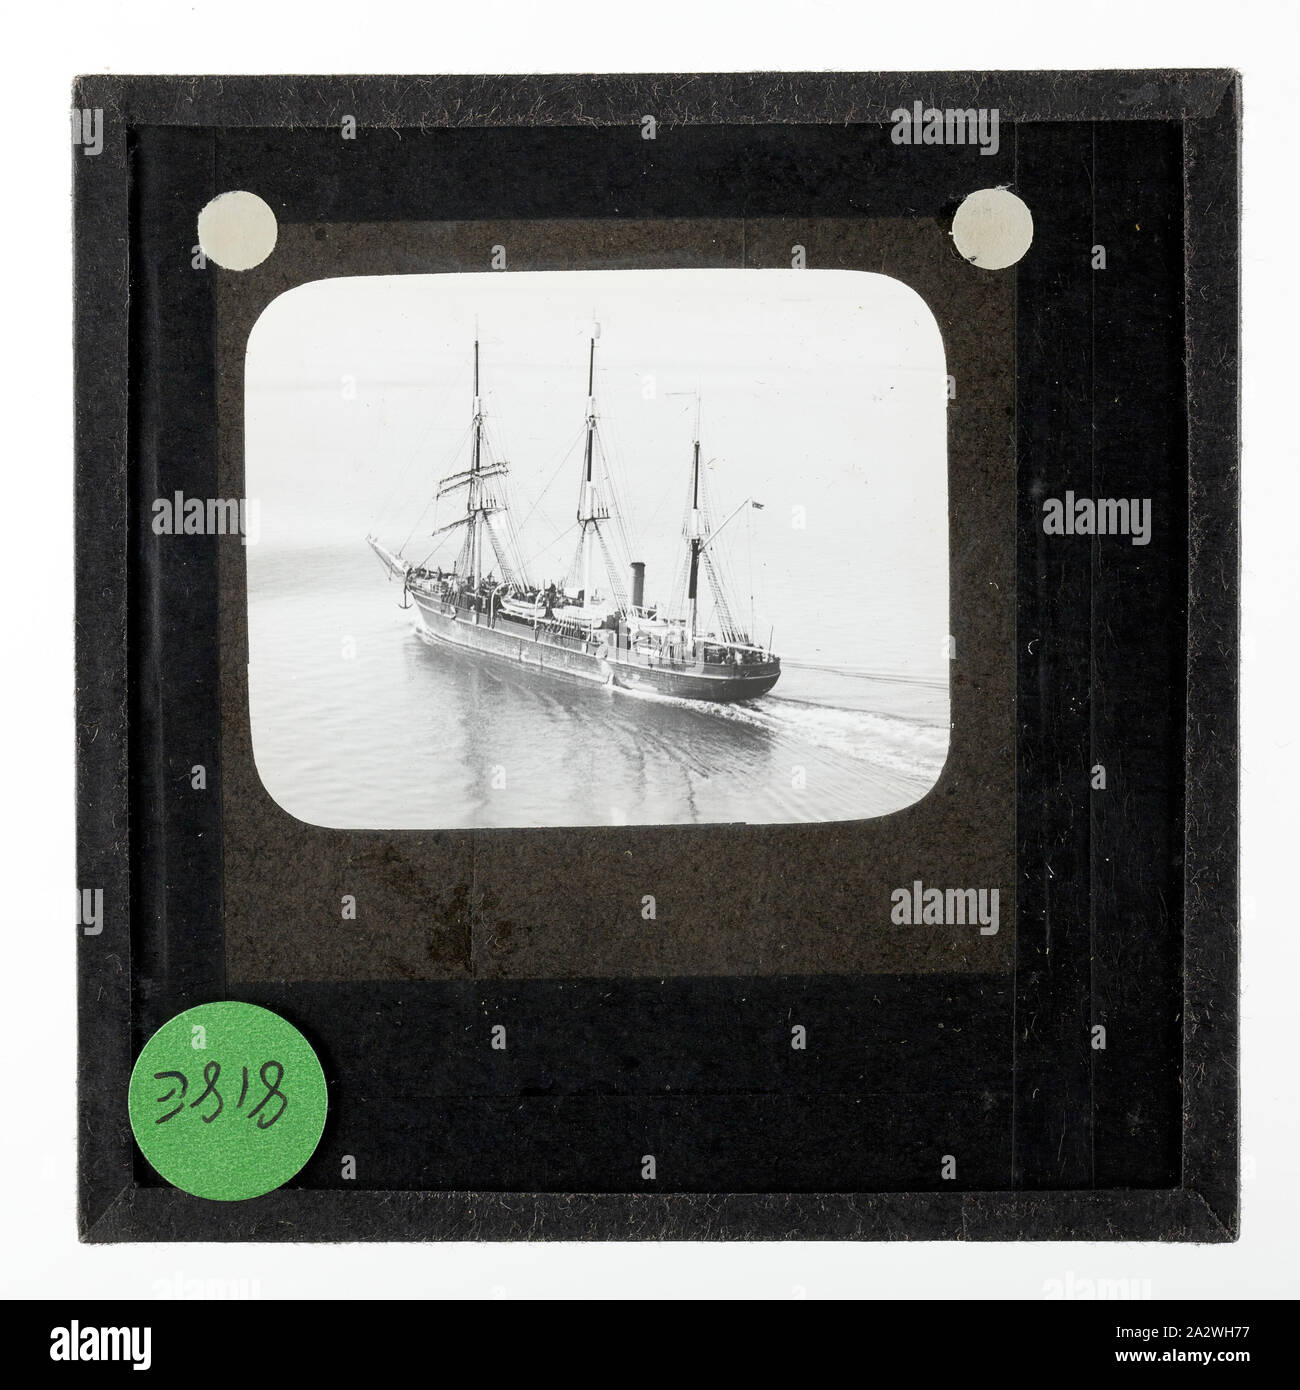 Lantern Slide - An Aerial View of the Discovery Steaming Along in Open Water, BANZARE Voyage 2, Antarctica, 1930-1931, Lantern slide of an aerial view of the ship Discovery in open waters. One of 328 images in various formats including artworks, photographs, glass negatives and lantern slides Stock Photo